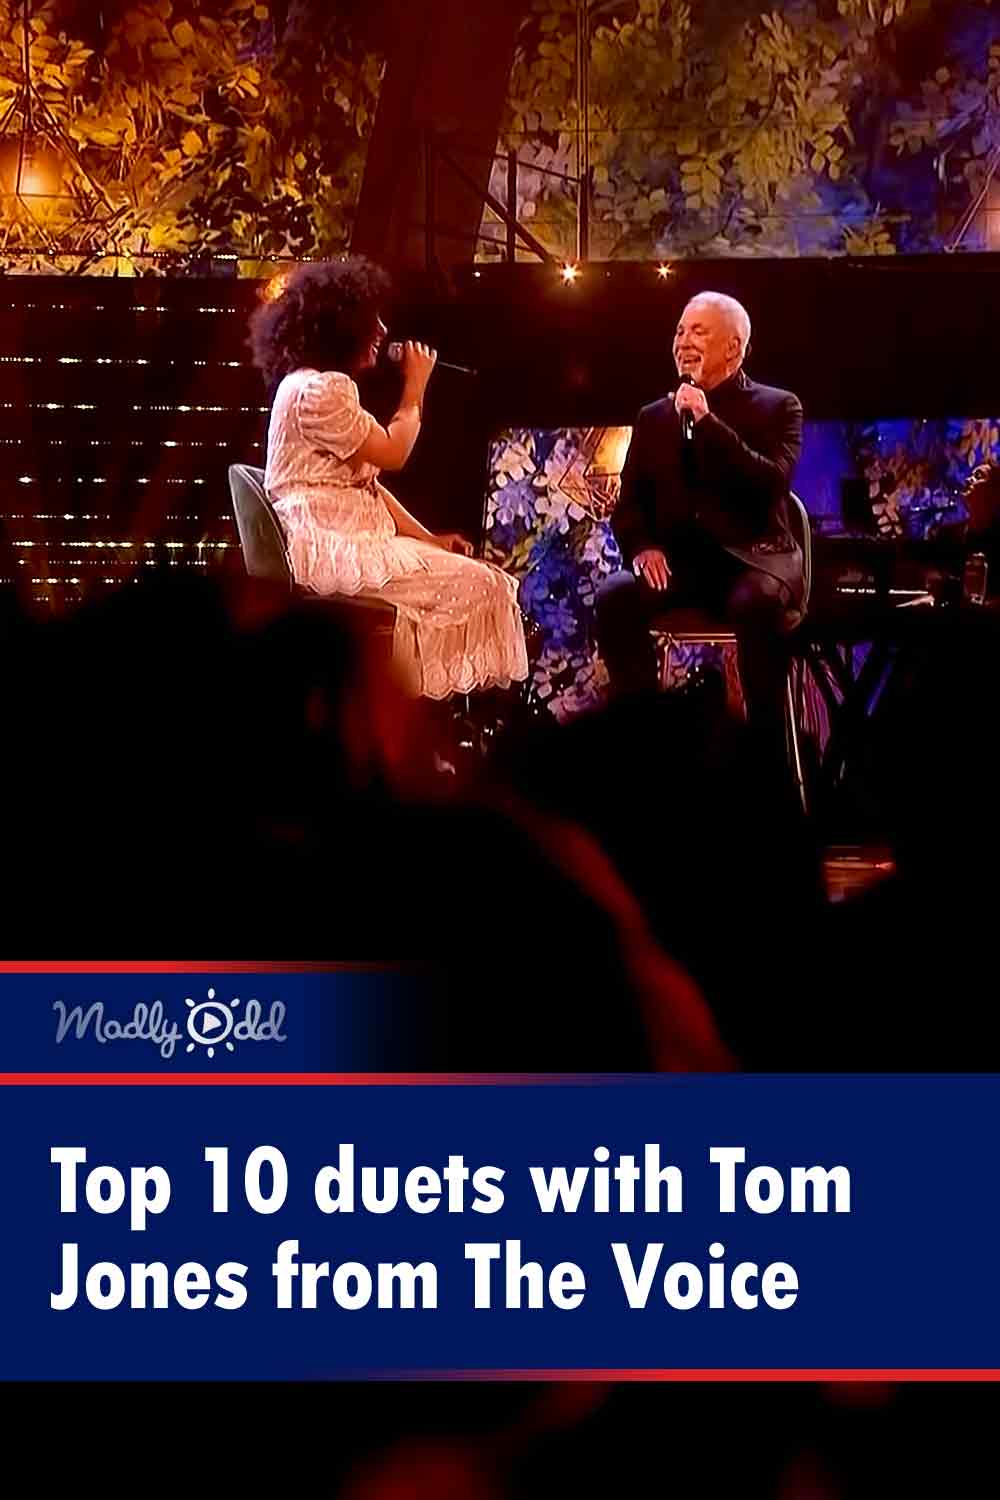 Top 10 duets with Tom Jones from The Voice